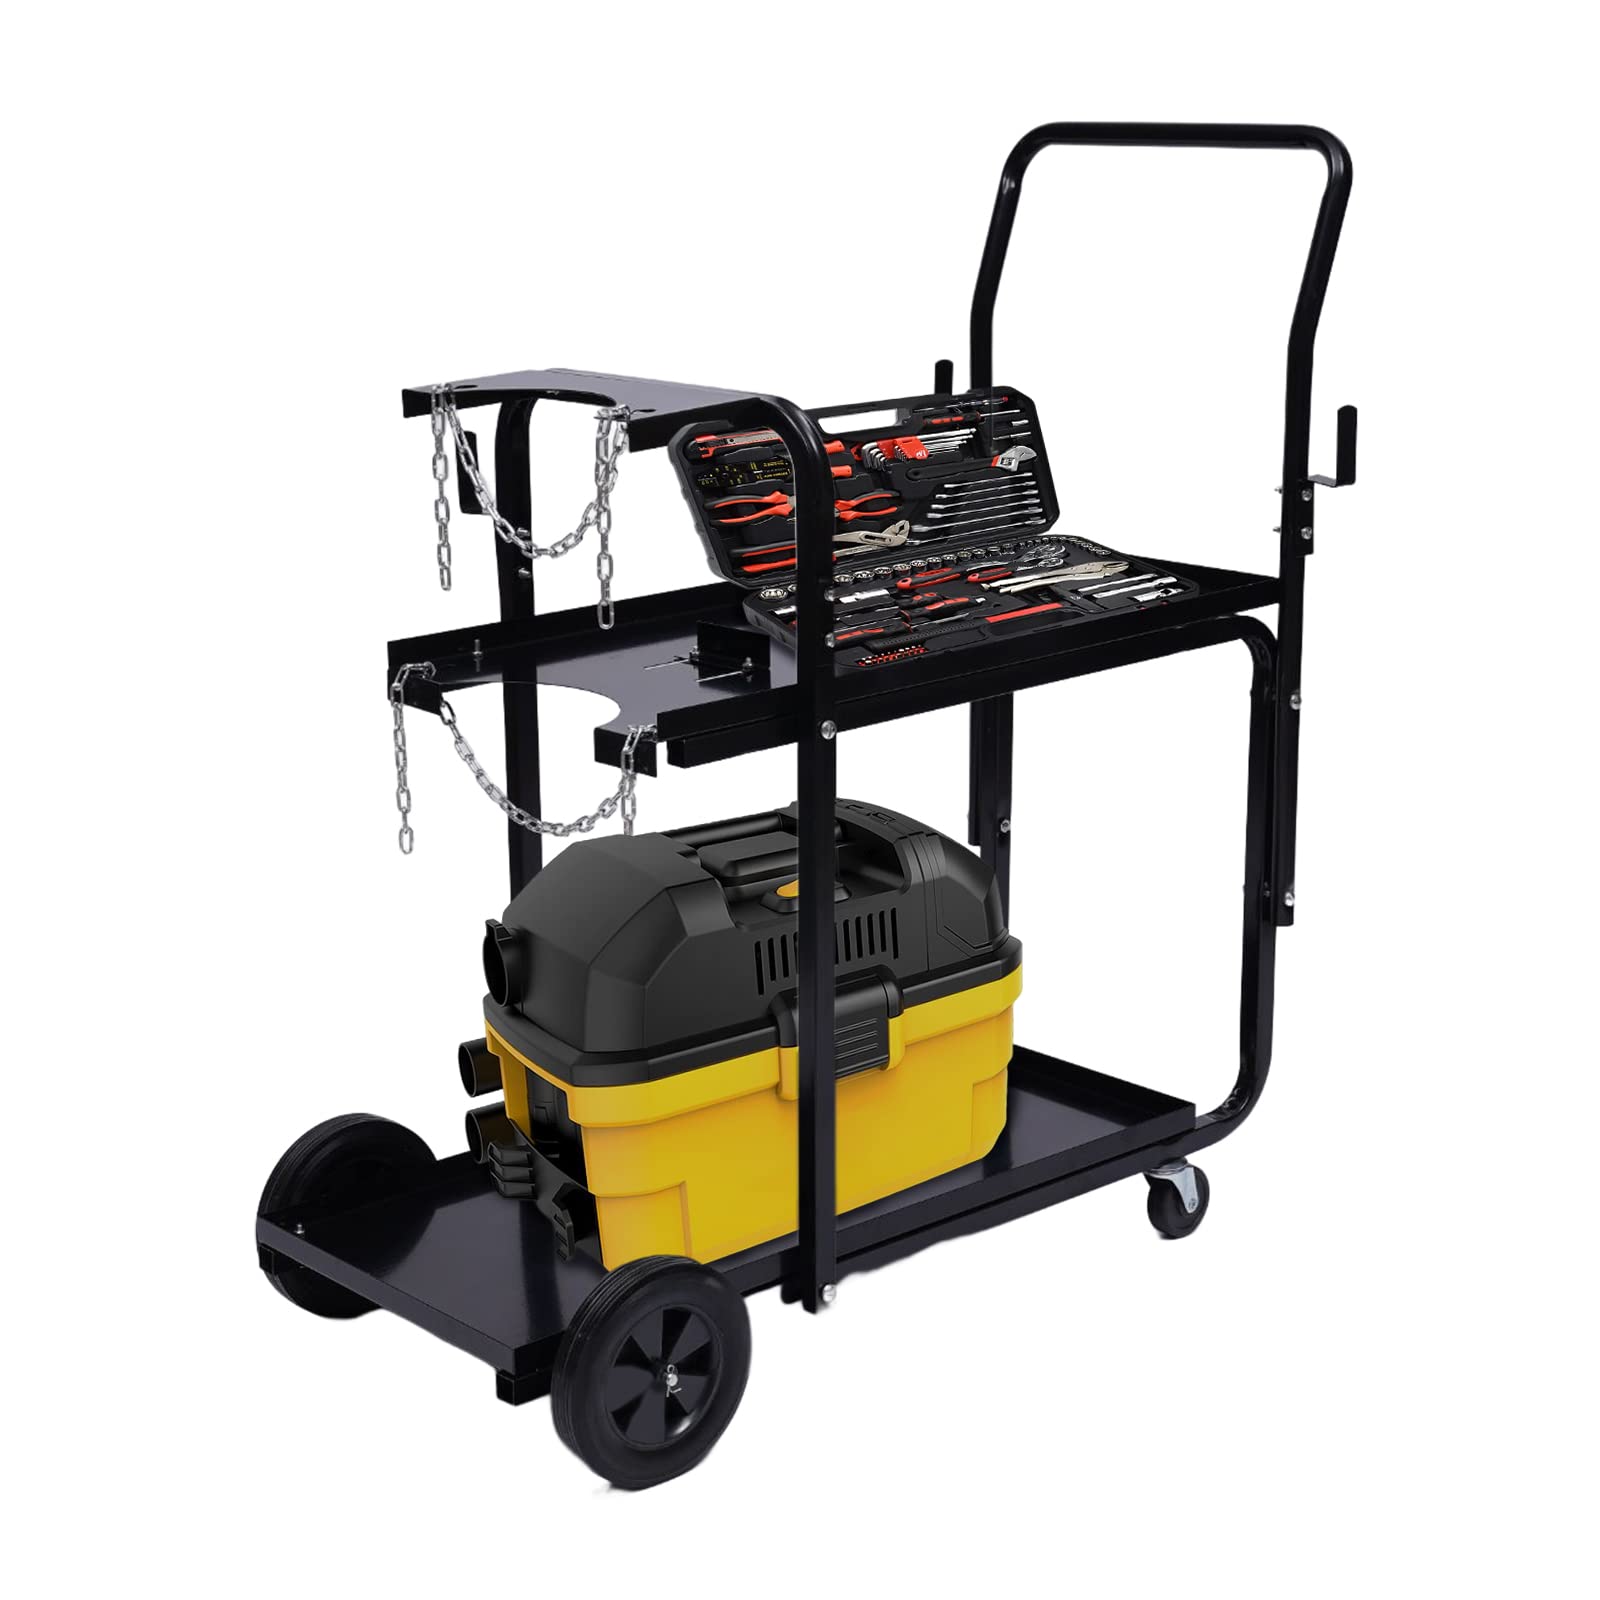 2-Tier Welding Cart Portable Rolling Welding Cart Trolley Workshop Organizer,Heavy Duty MIG TIG ARC Welder Plasma Cutter Cart with Gas Cylinders Storage and Safety Chains,175lbs Capacity